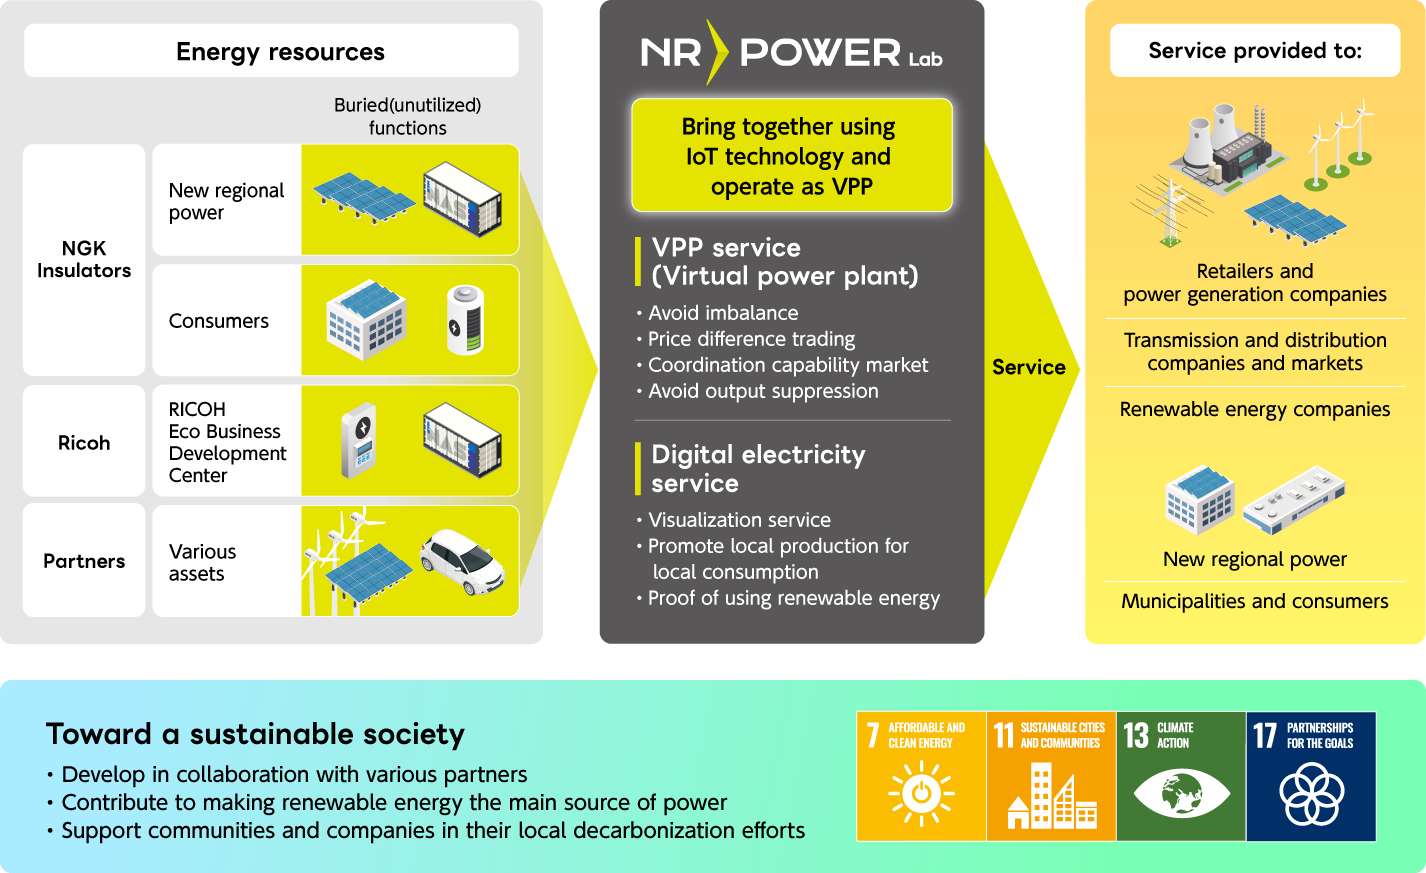 Using with IoT technology, NR-Power Lab brings together the energy resources of NGK Insulators, Ricoh, and partners and operates them as a VPP to offer various services.